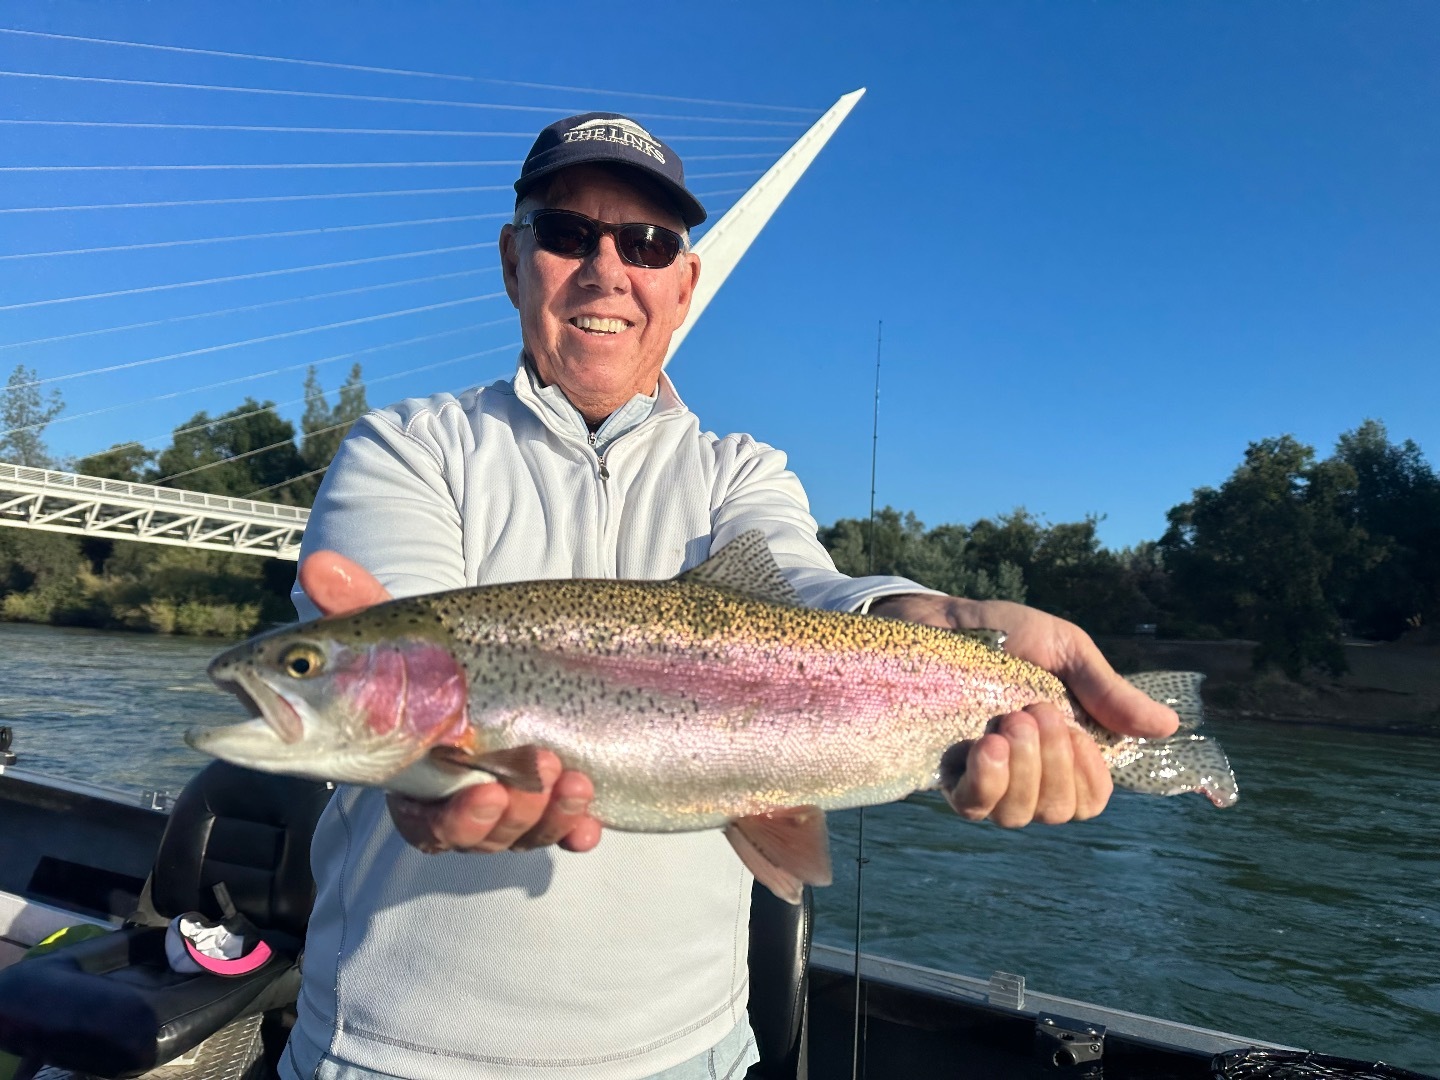 Great Lower Sac Trout Fishing!